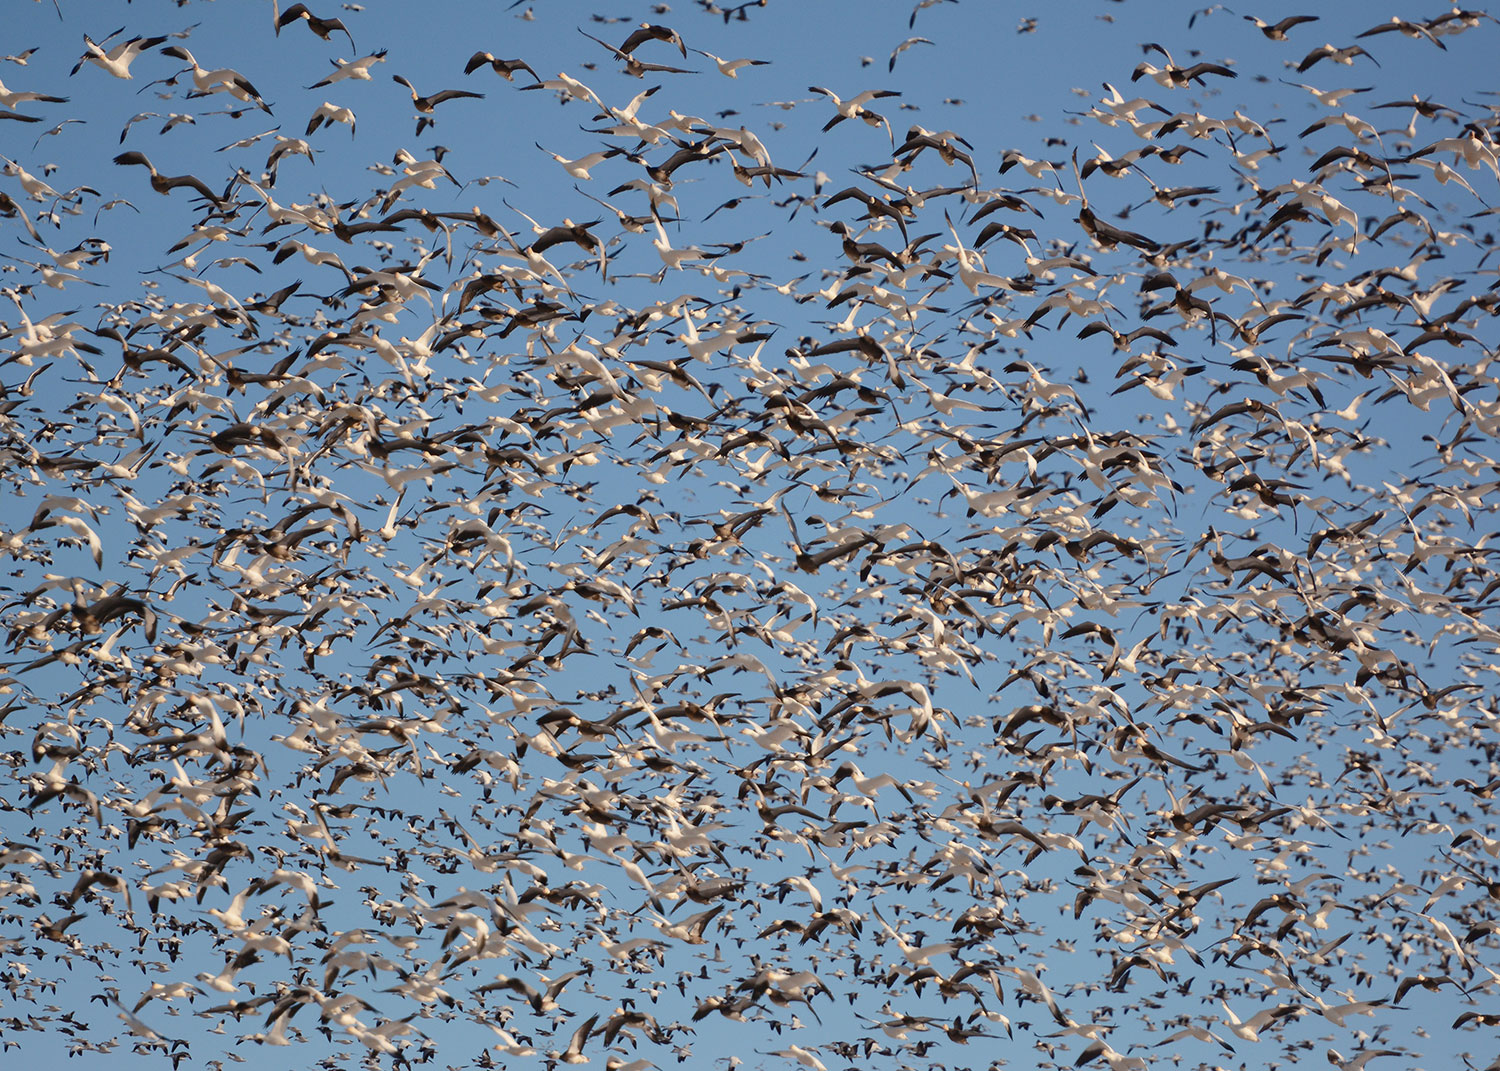 A large flock of snow geese.